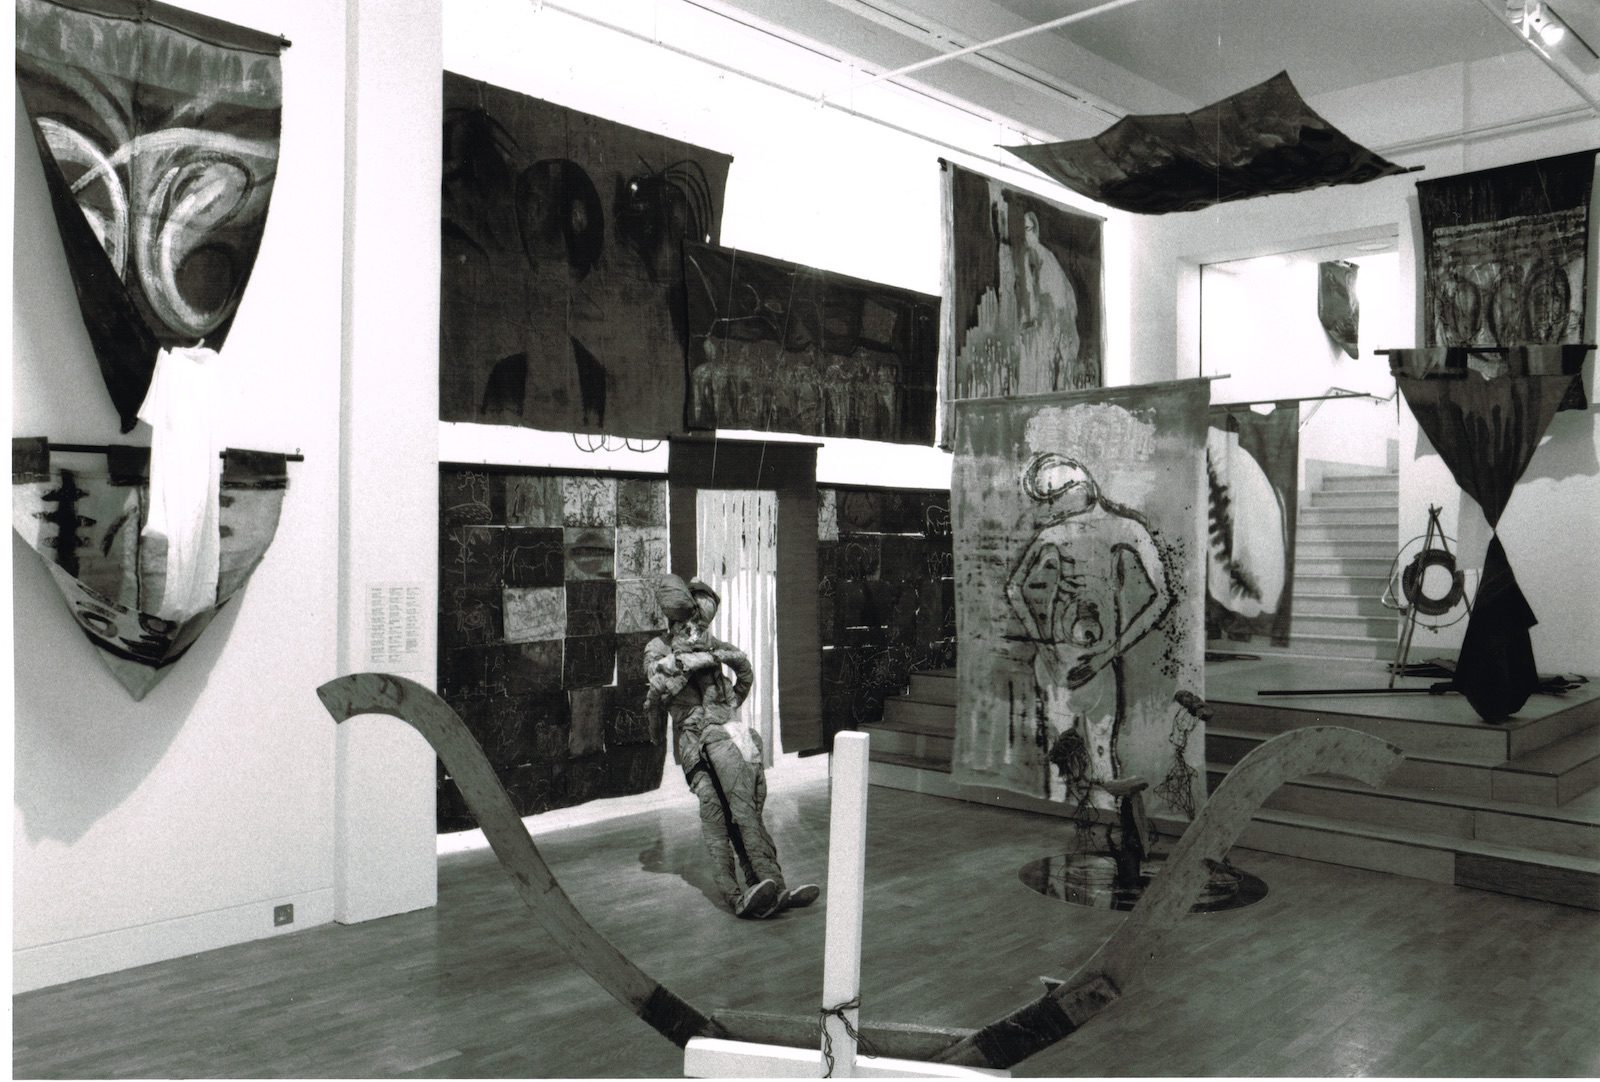 Installation views of Seven Stories about Modern Art in Africa exhibition held at the Whitechapel Gallery, 27 September – 26 November 1995. Courtesy of Whitechapel Gallery, Whitechapel Gallery Archive